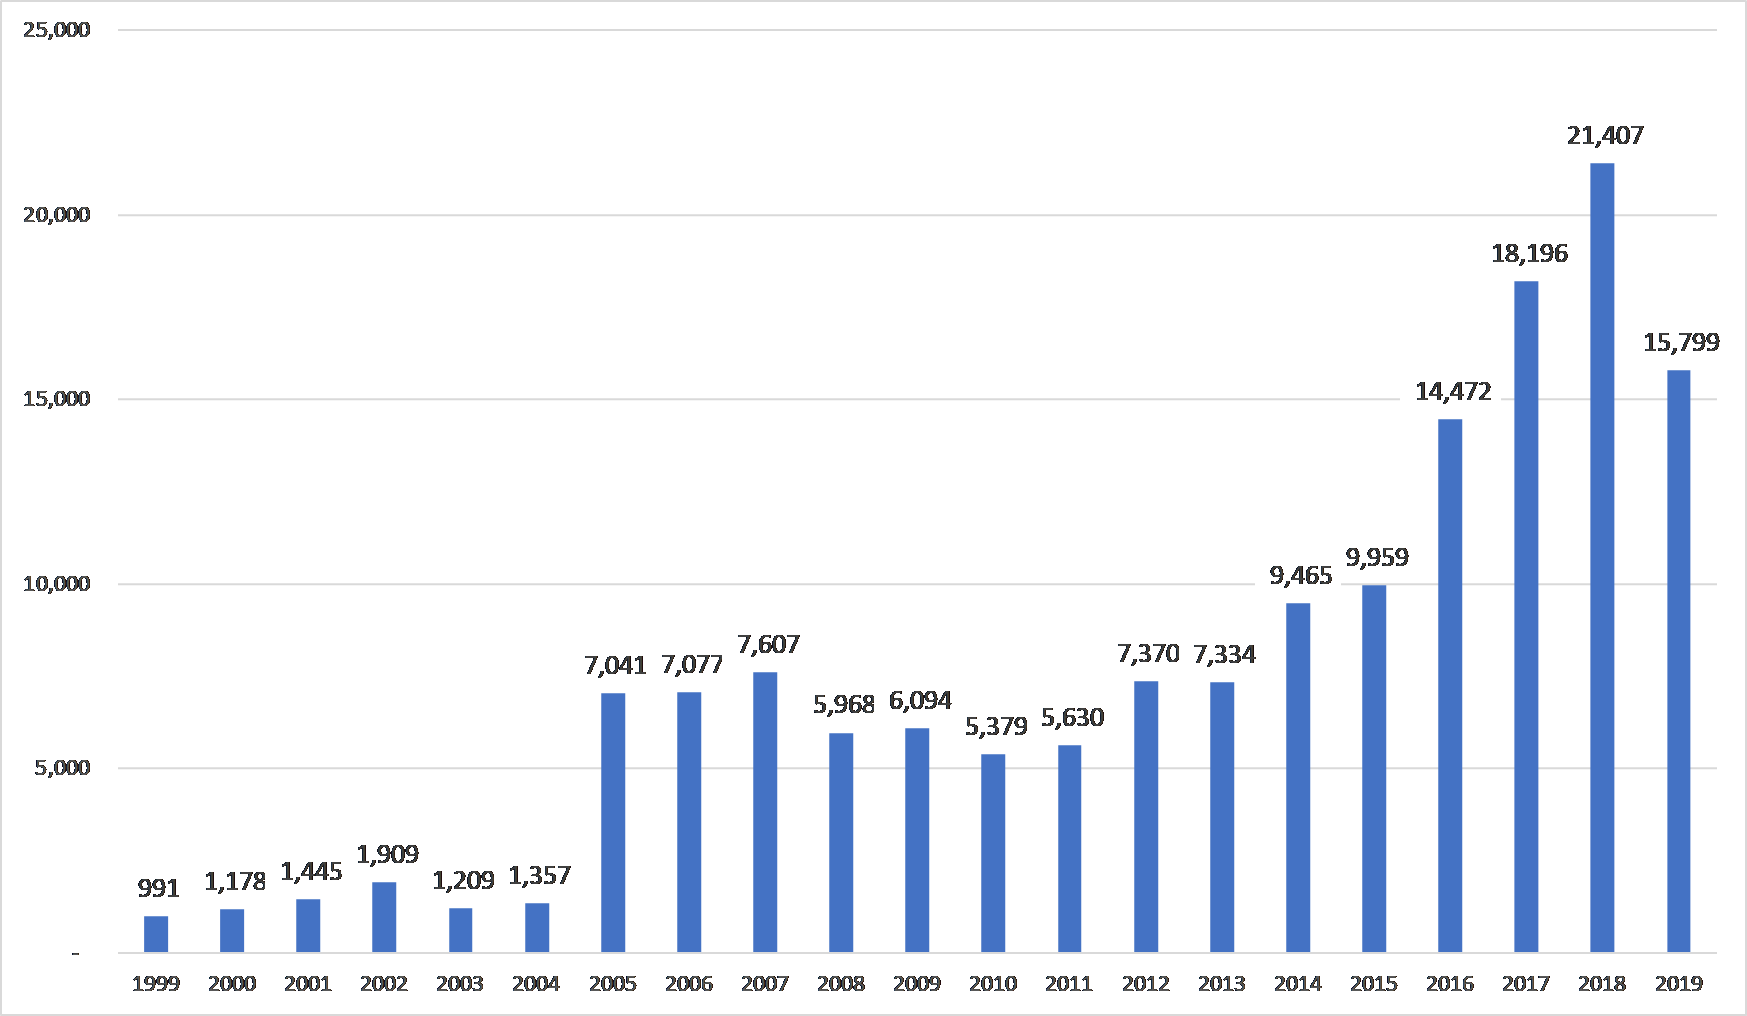 Comparison of Reserved CVE Entries by Year for All Quarters - CYQ32019